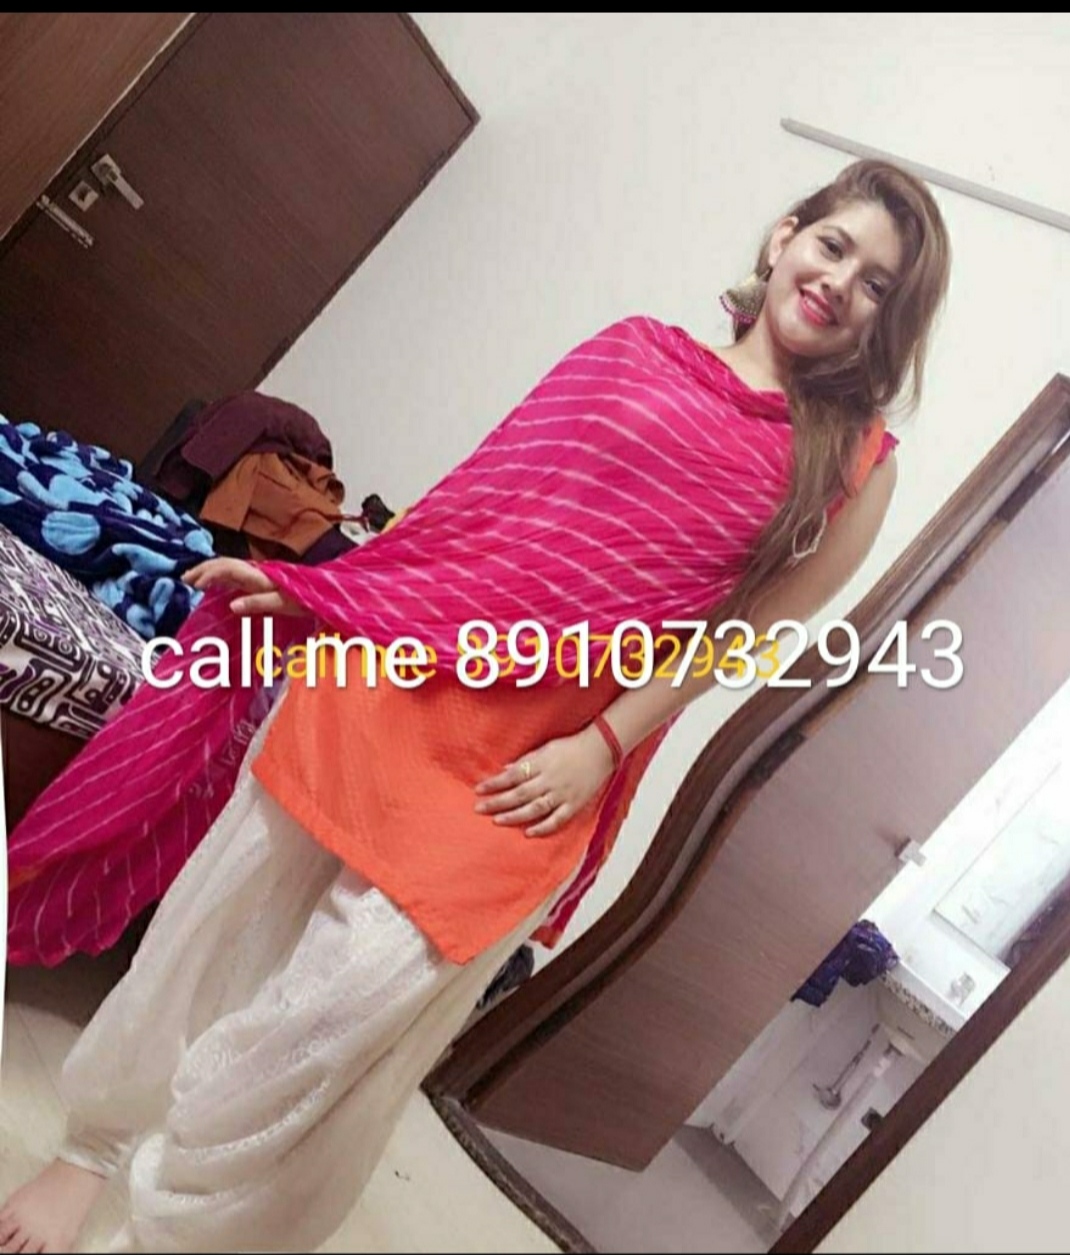 Balasore low price escorts service available anytime ngsh